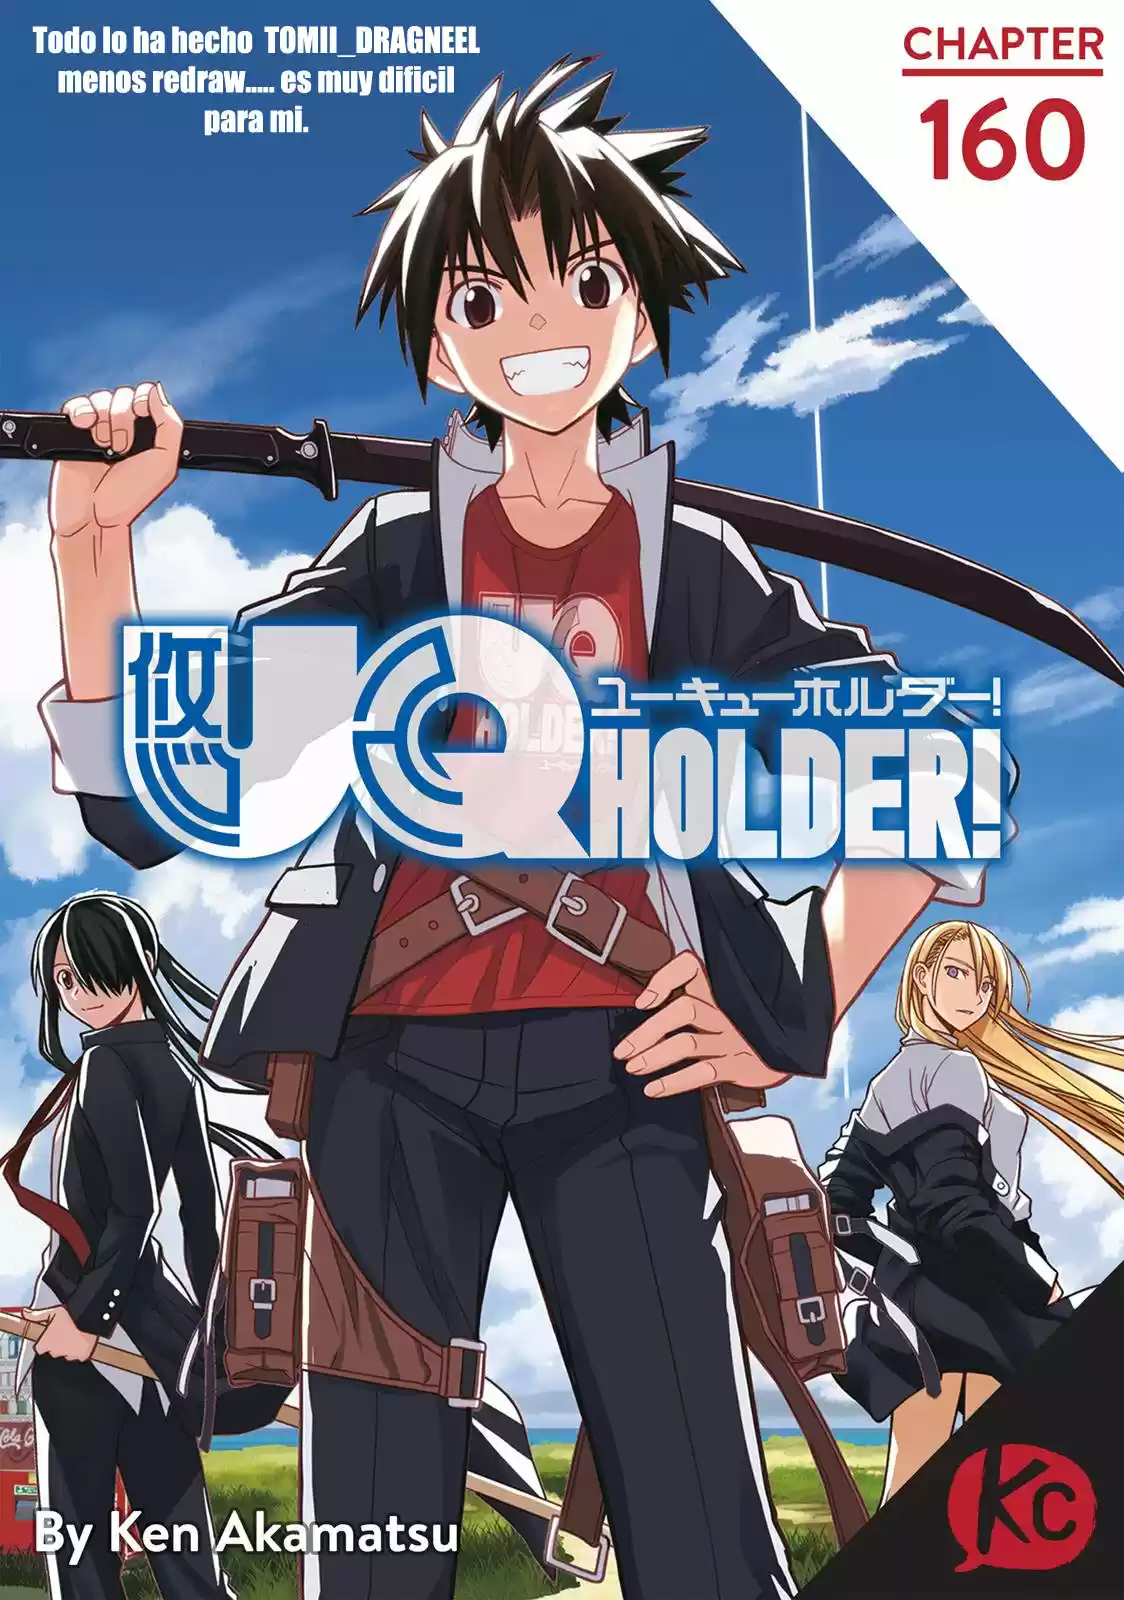 Uq Holder: Chapter 160 - Page 1